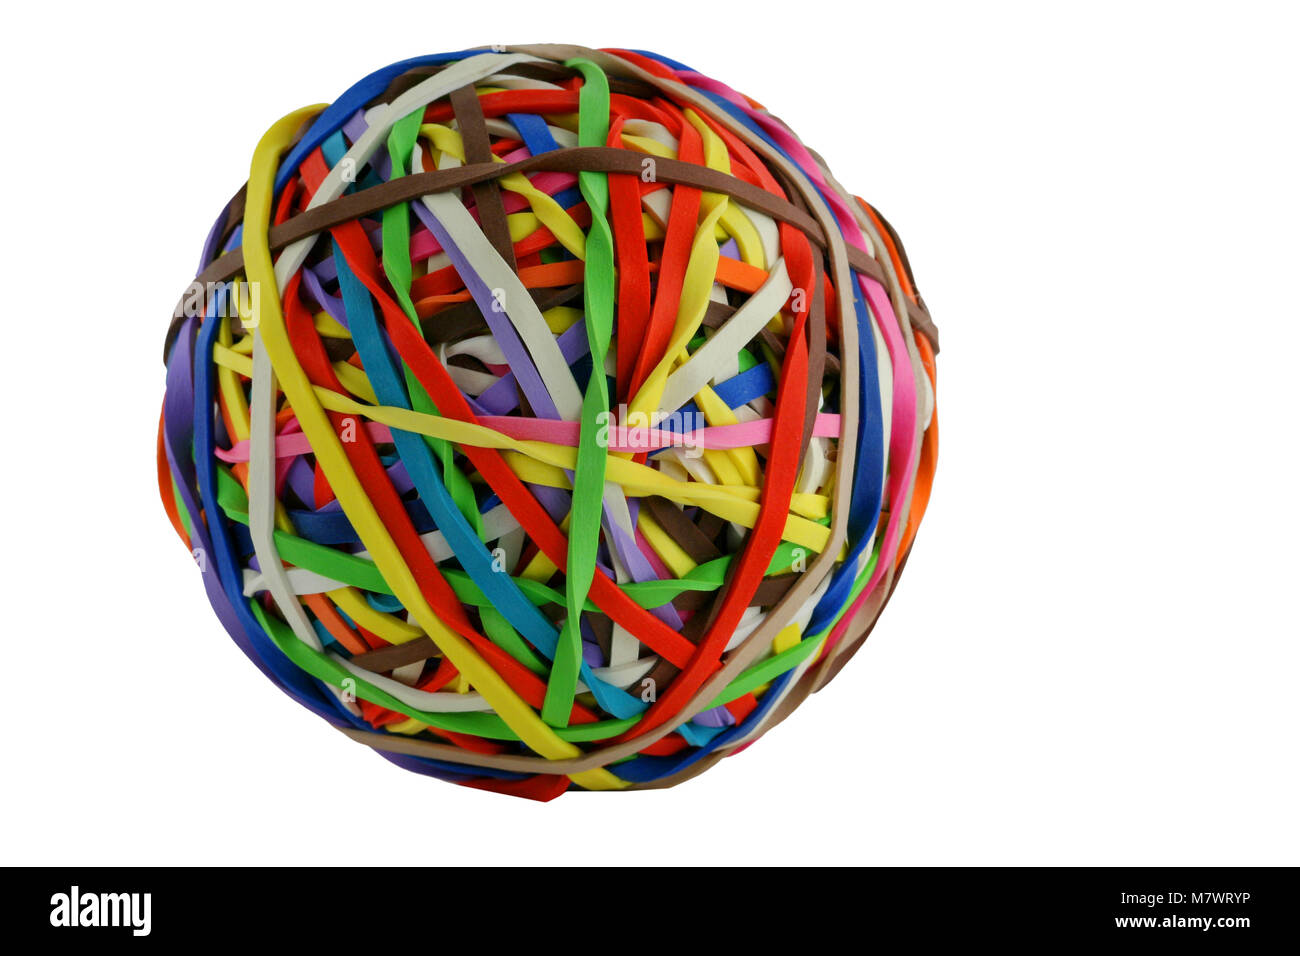 Colorful rubber bands ball isolated on white background. Stock Photo by  jirkaejc